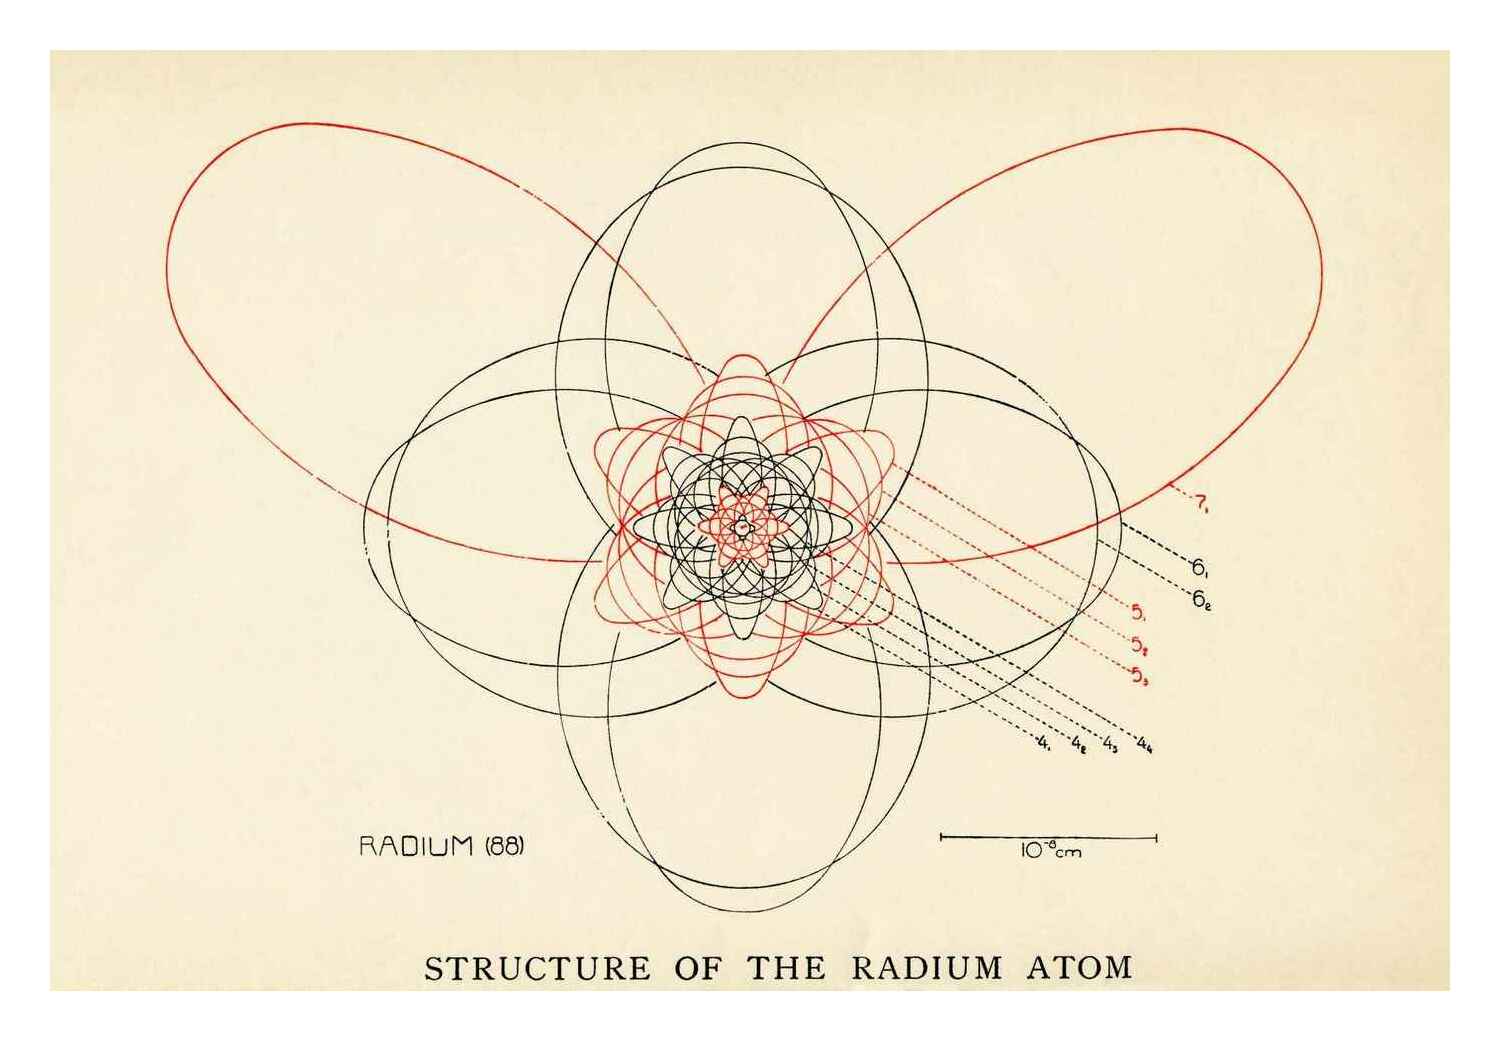 Rubrication denotes odd vs even electron orbitals in this schematic atom diagram, “Principal Features of Atomic Structure in Some of the Elements—Atomic Structure of Radium”; color plate #2, pg217, The atom and the Bohr theory of its structure: an elementary presentation, Holst & Kramers1922